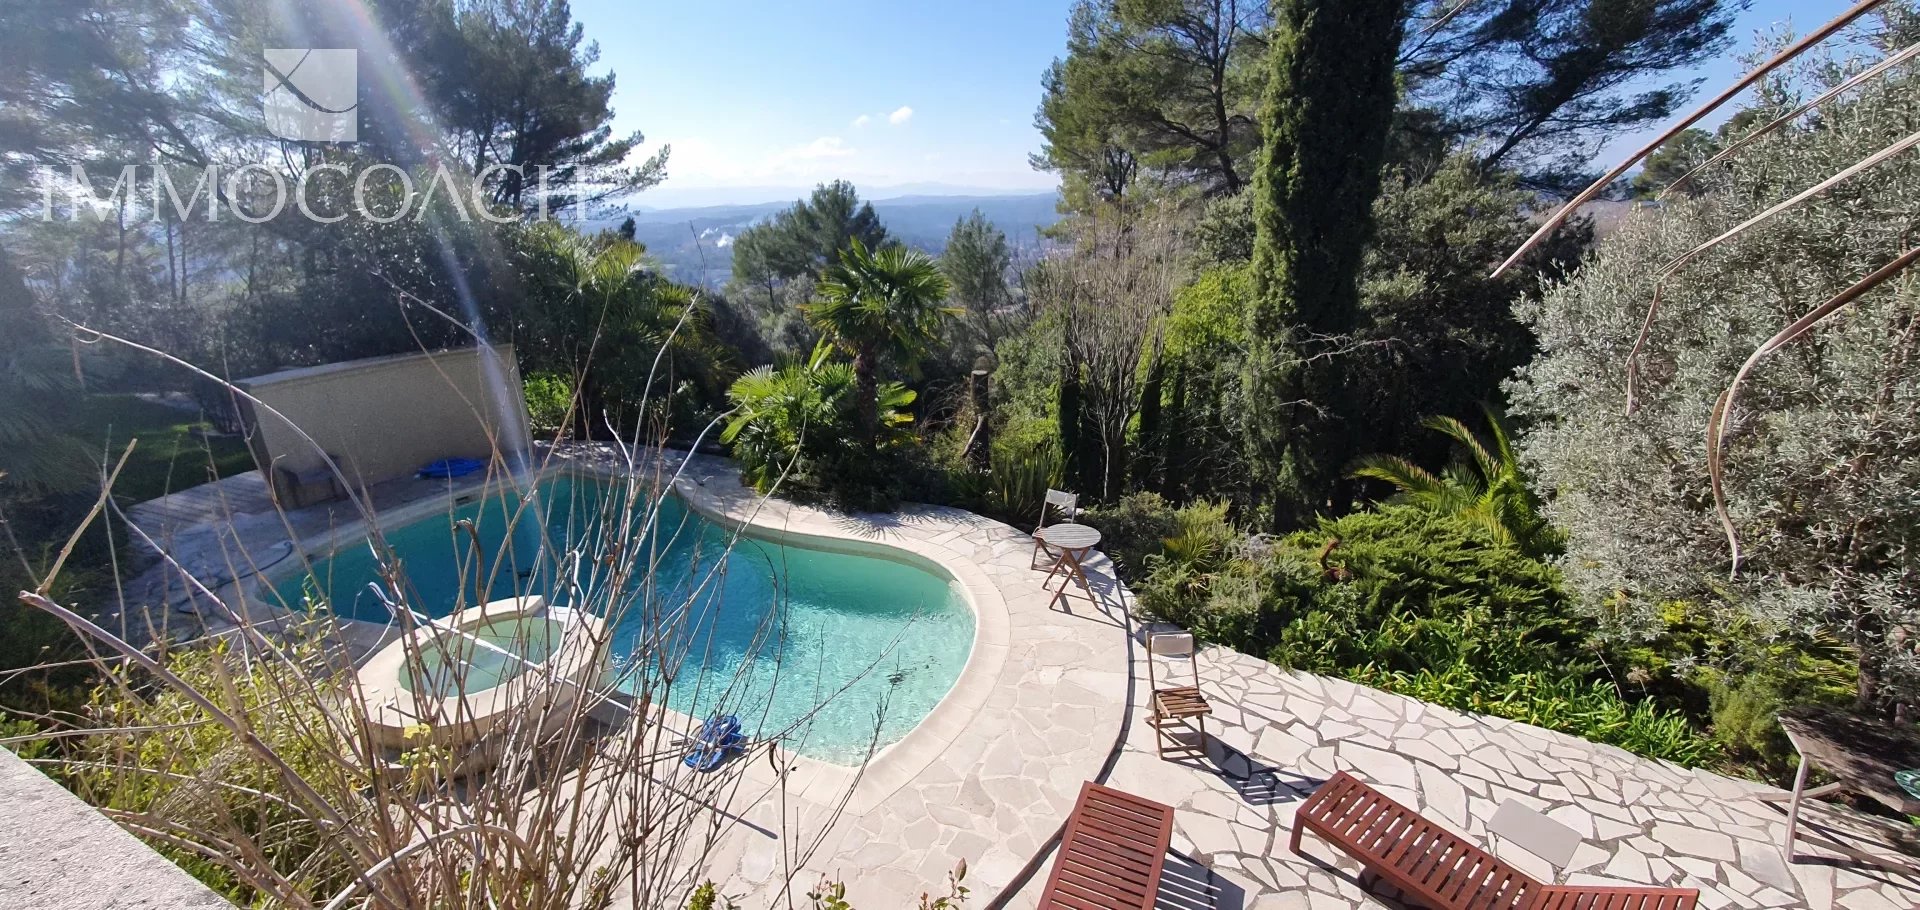 Magnificent 1.5 ha estate in the hills around Draguignan with panoramic views